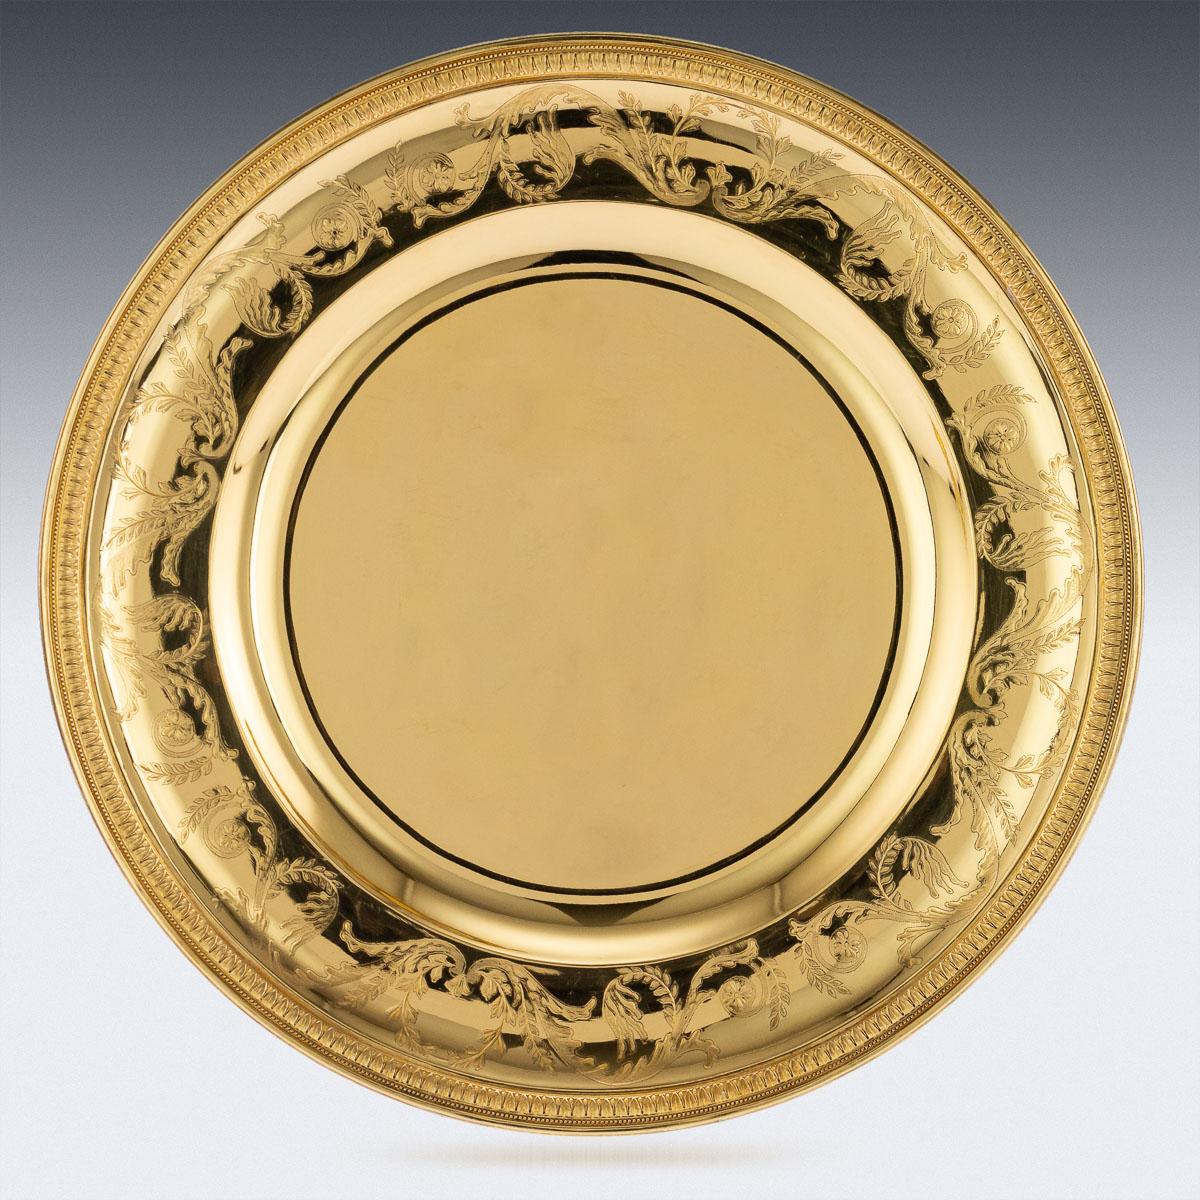 20th Century Antique French Solid Silver-Gilt 10 Plates and 2 Dishes, Puiforcat, circa 1910